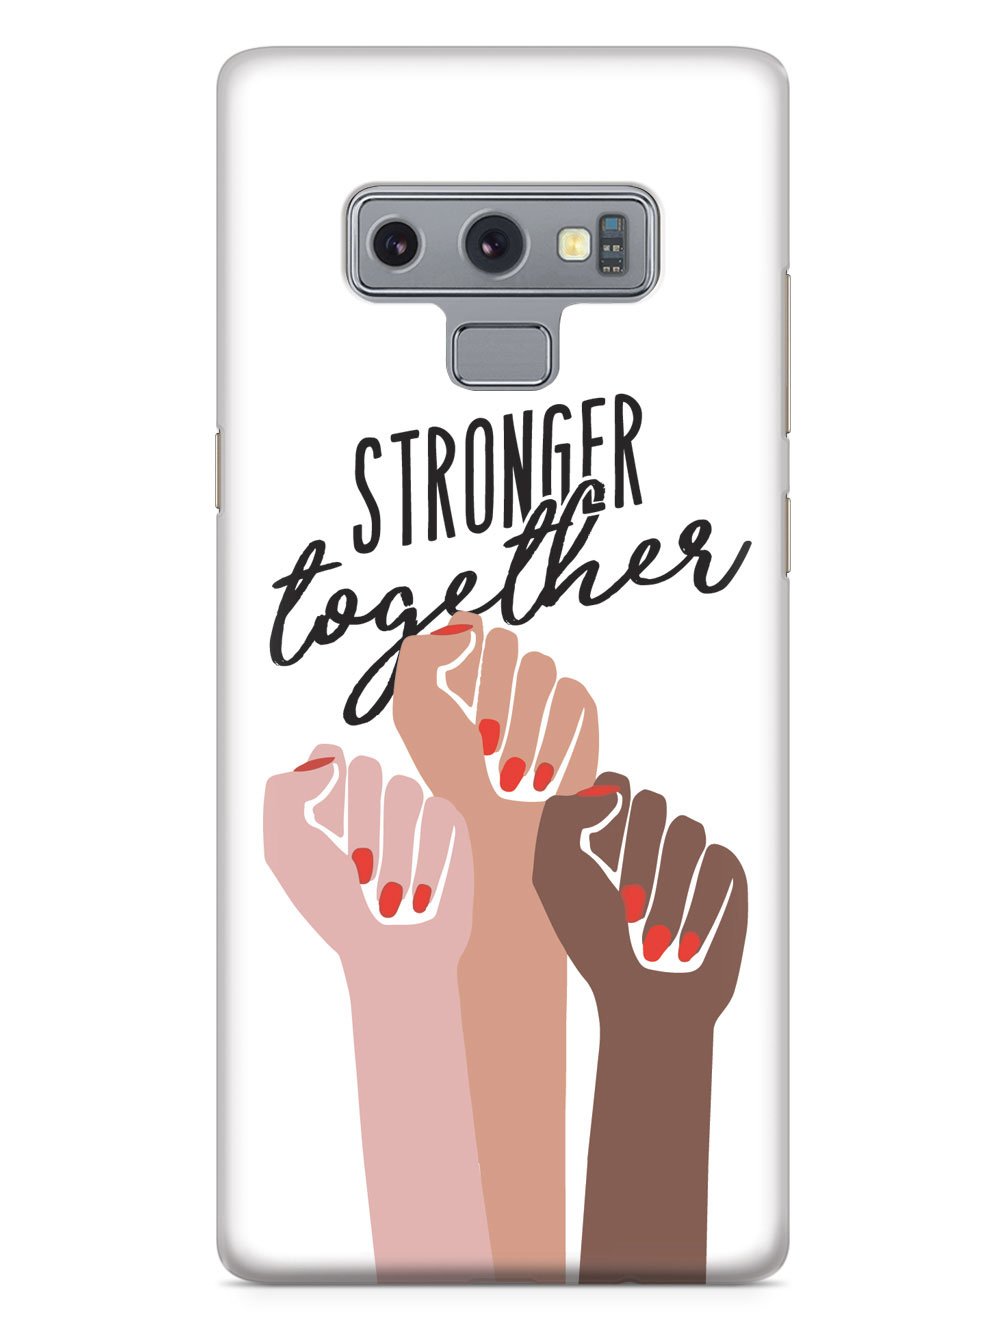 Stronger Together - Women's March Solidarity - White Case